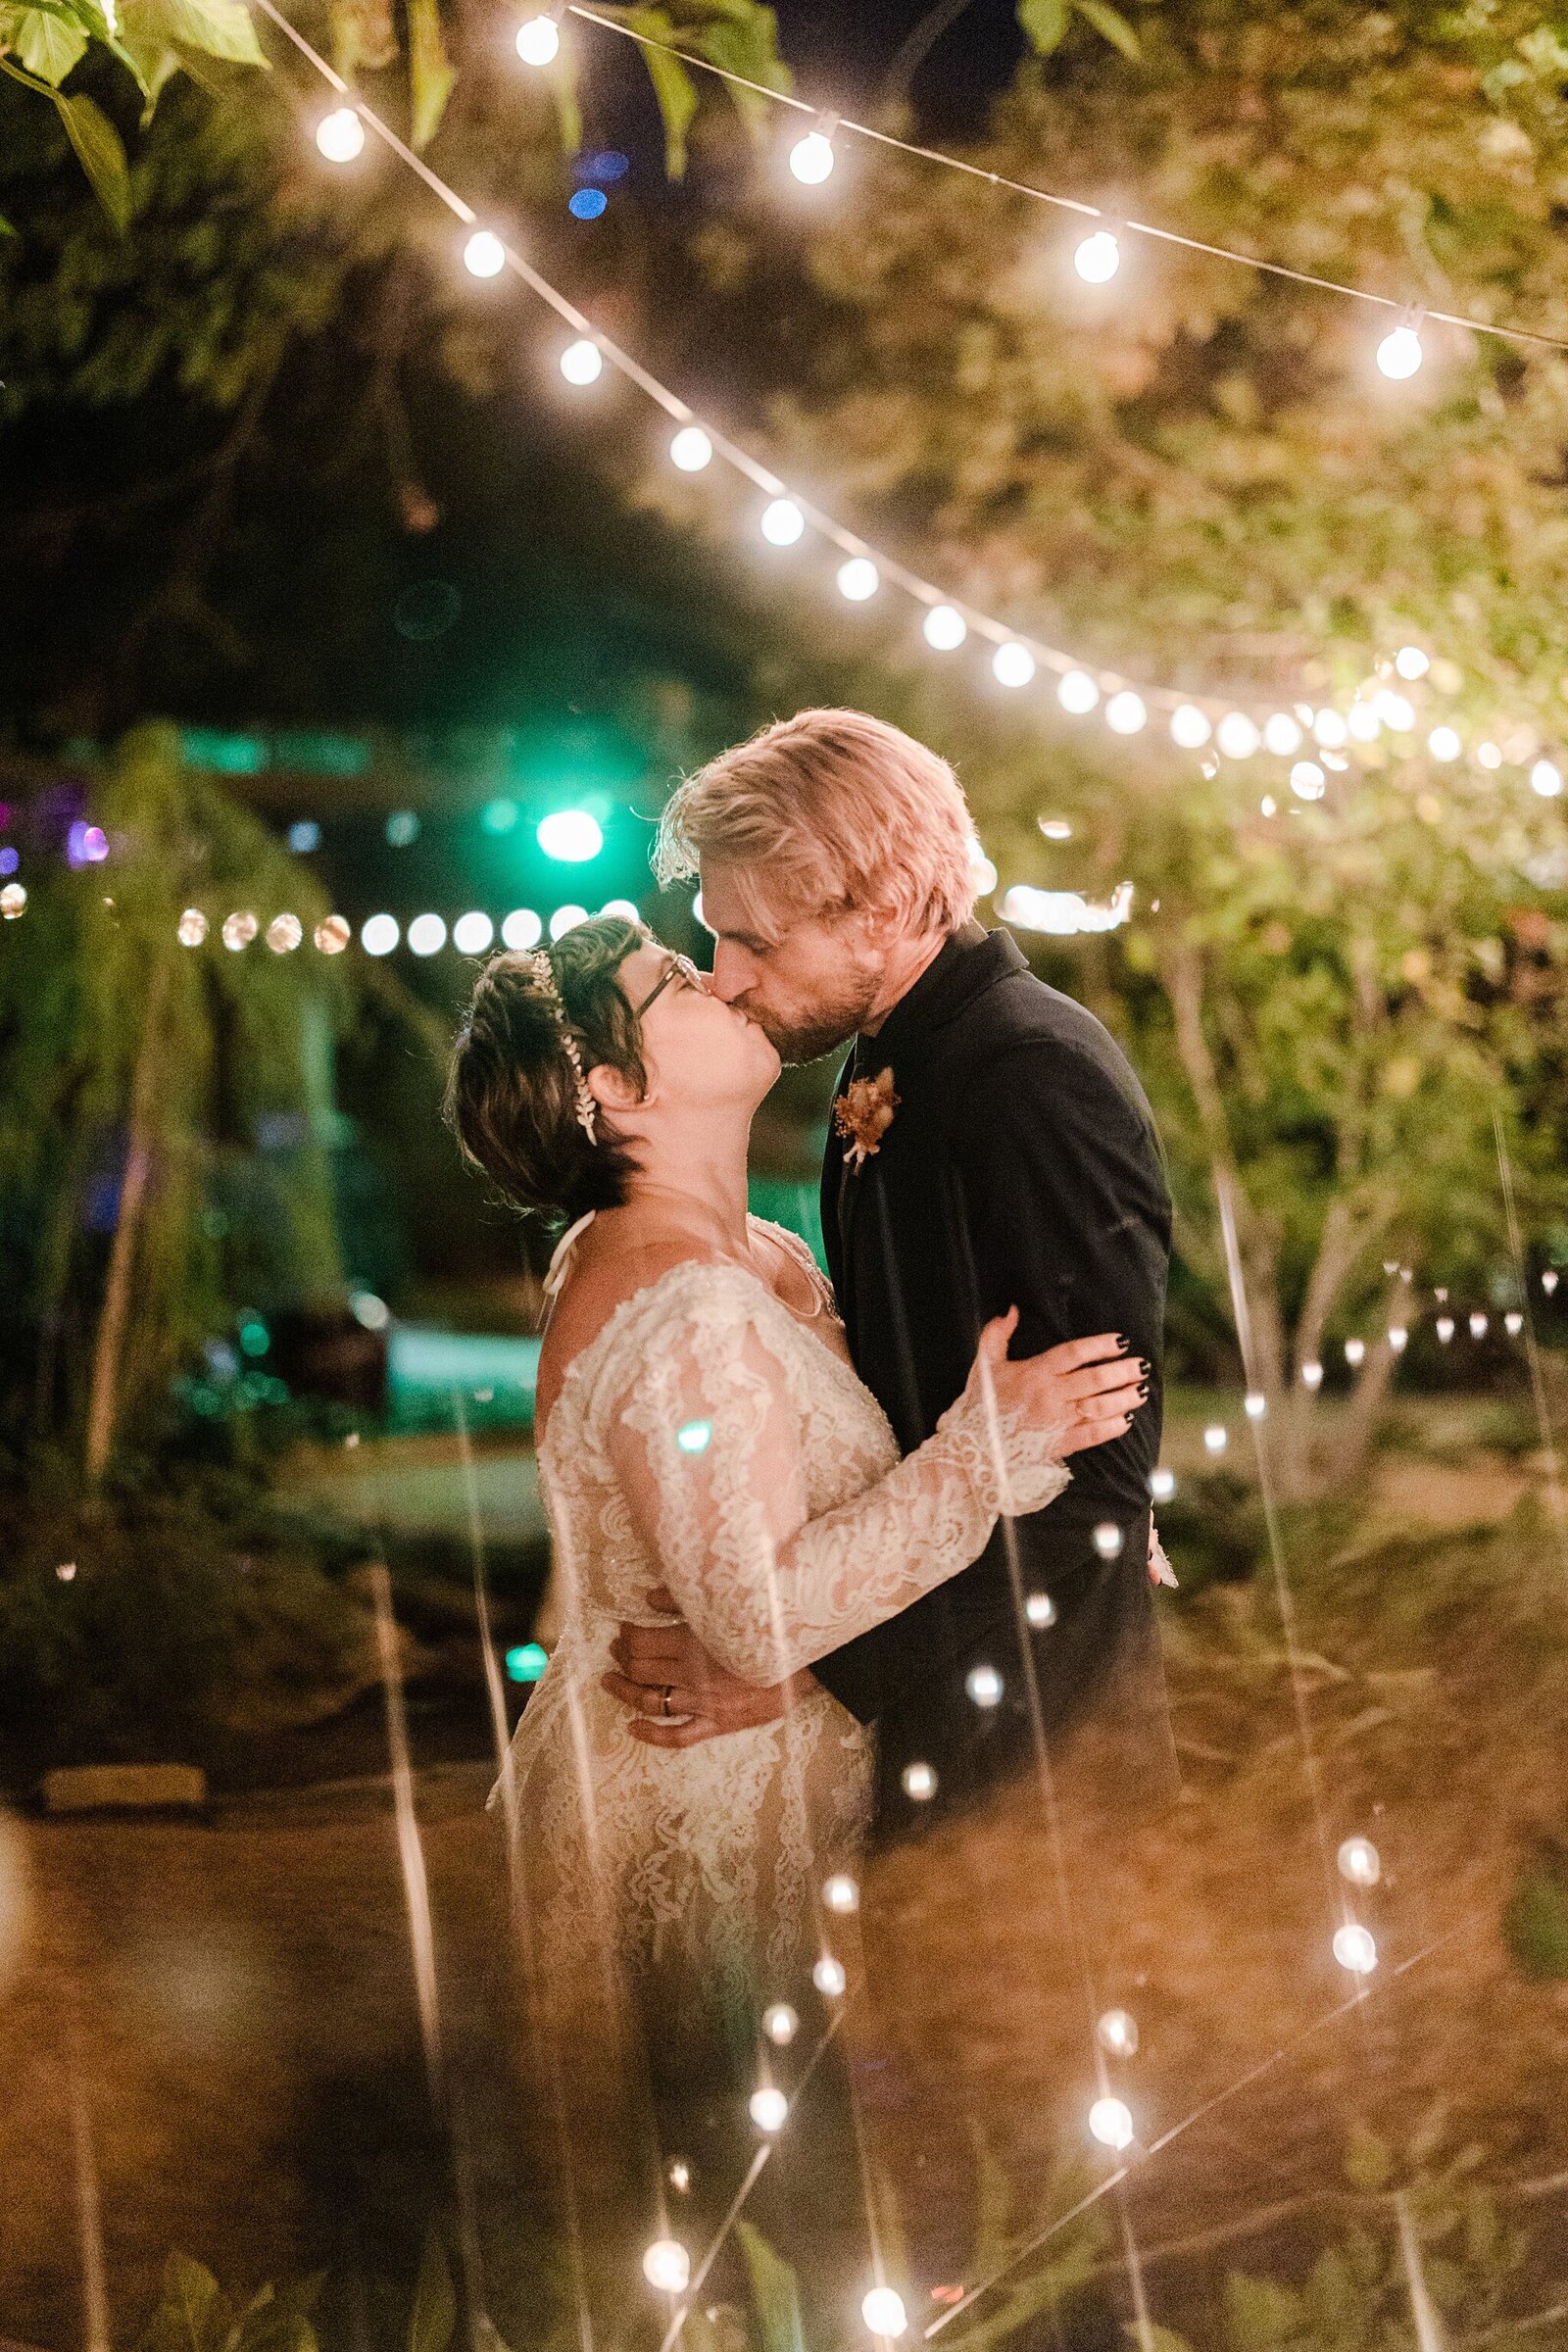 A bride and groom sharing a kiss at a plant nursery venue surrounded by cafe lights and many different plants and trees. The bride is on the left and is wearing a long sleeve lace dress and a flower crown. The groom is on the right and is wearing a black suit and boutonniere.